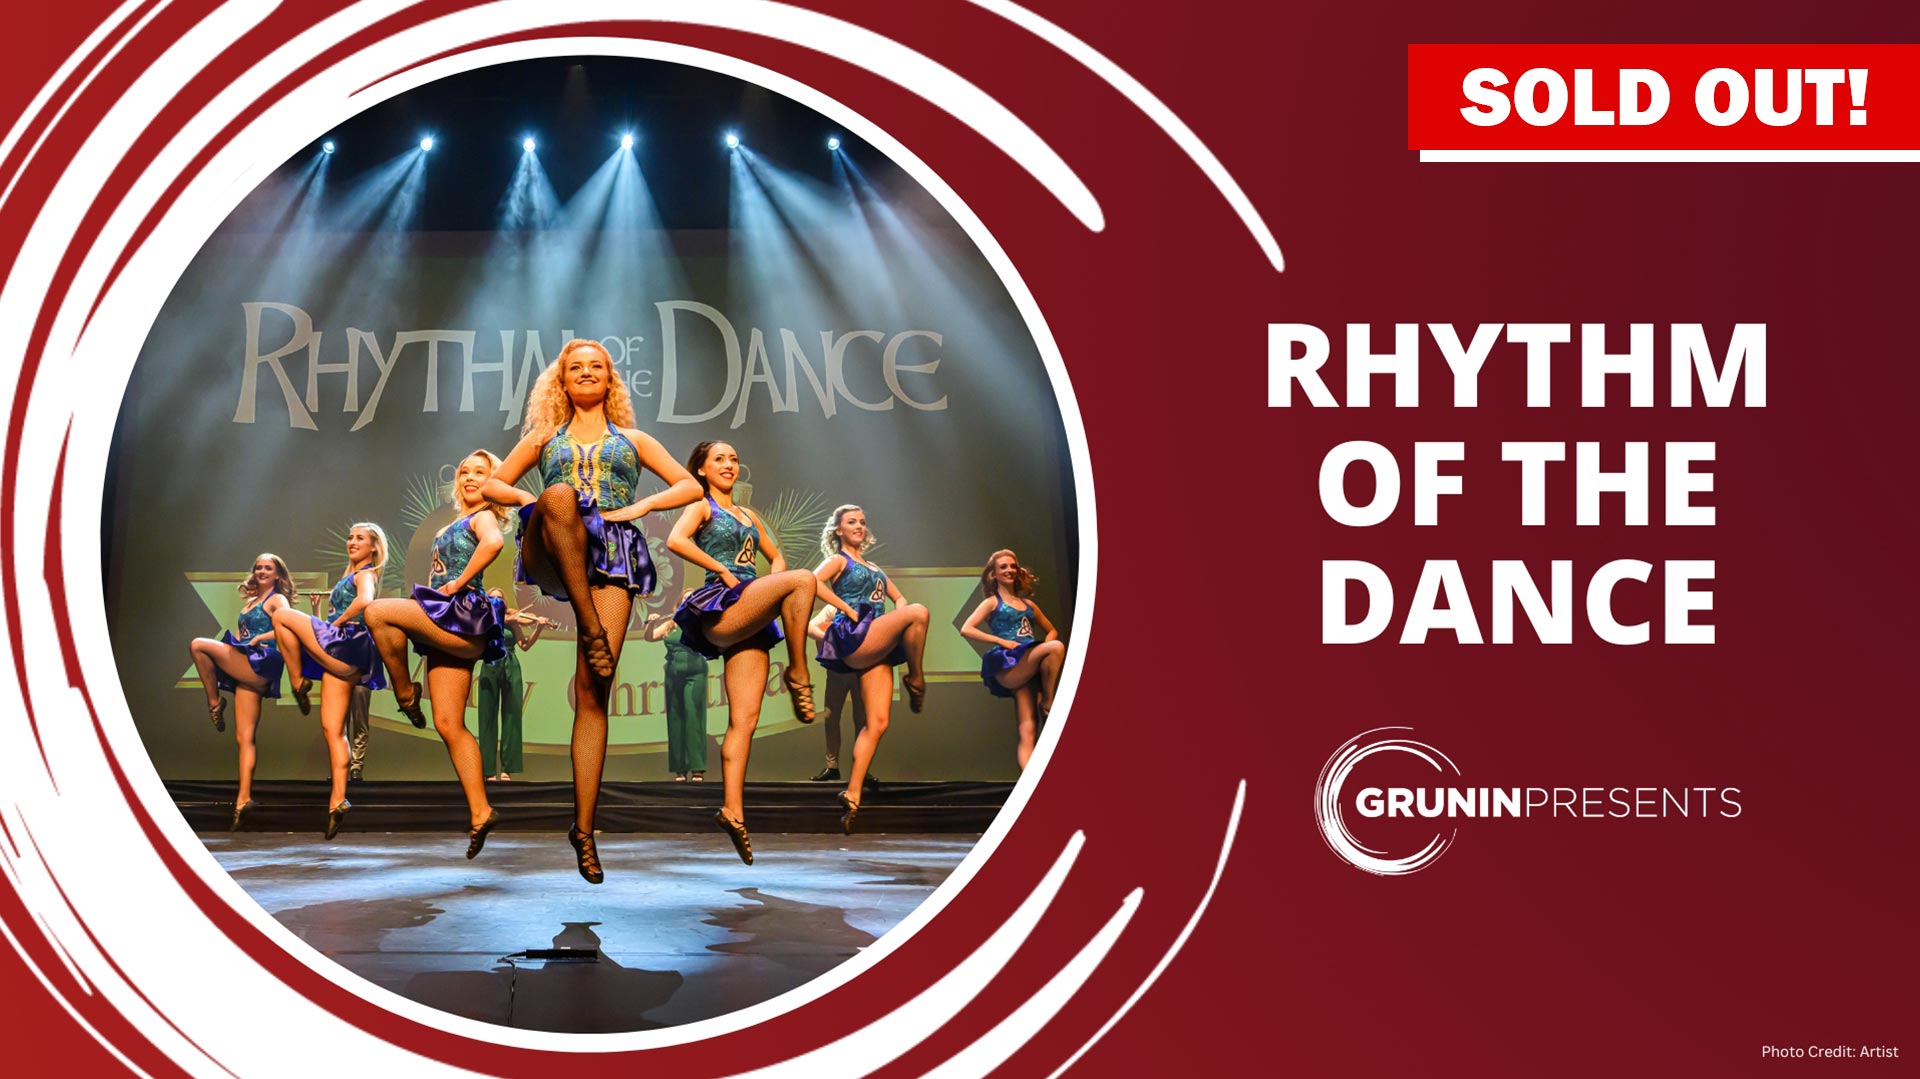 Rhythm of the Dance is currently Sold Out